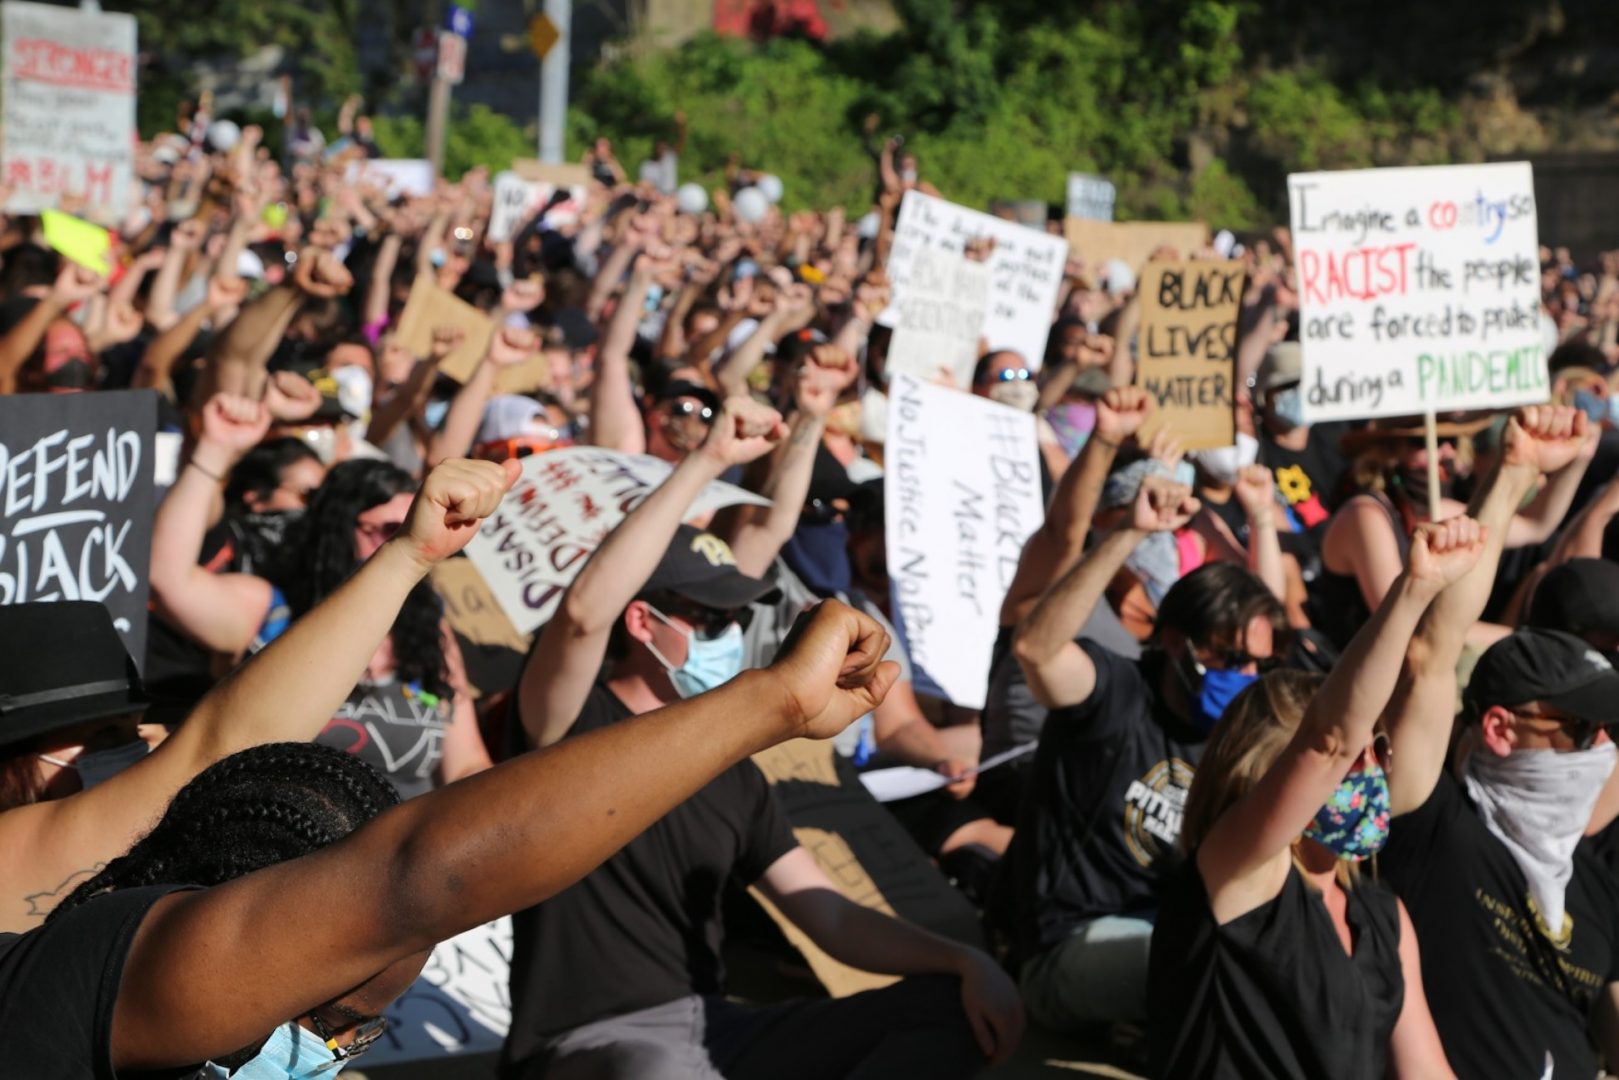 FILE PHOTO: Black Lives Matter protesters sit, with their fists raised, in Pittsburgh.